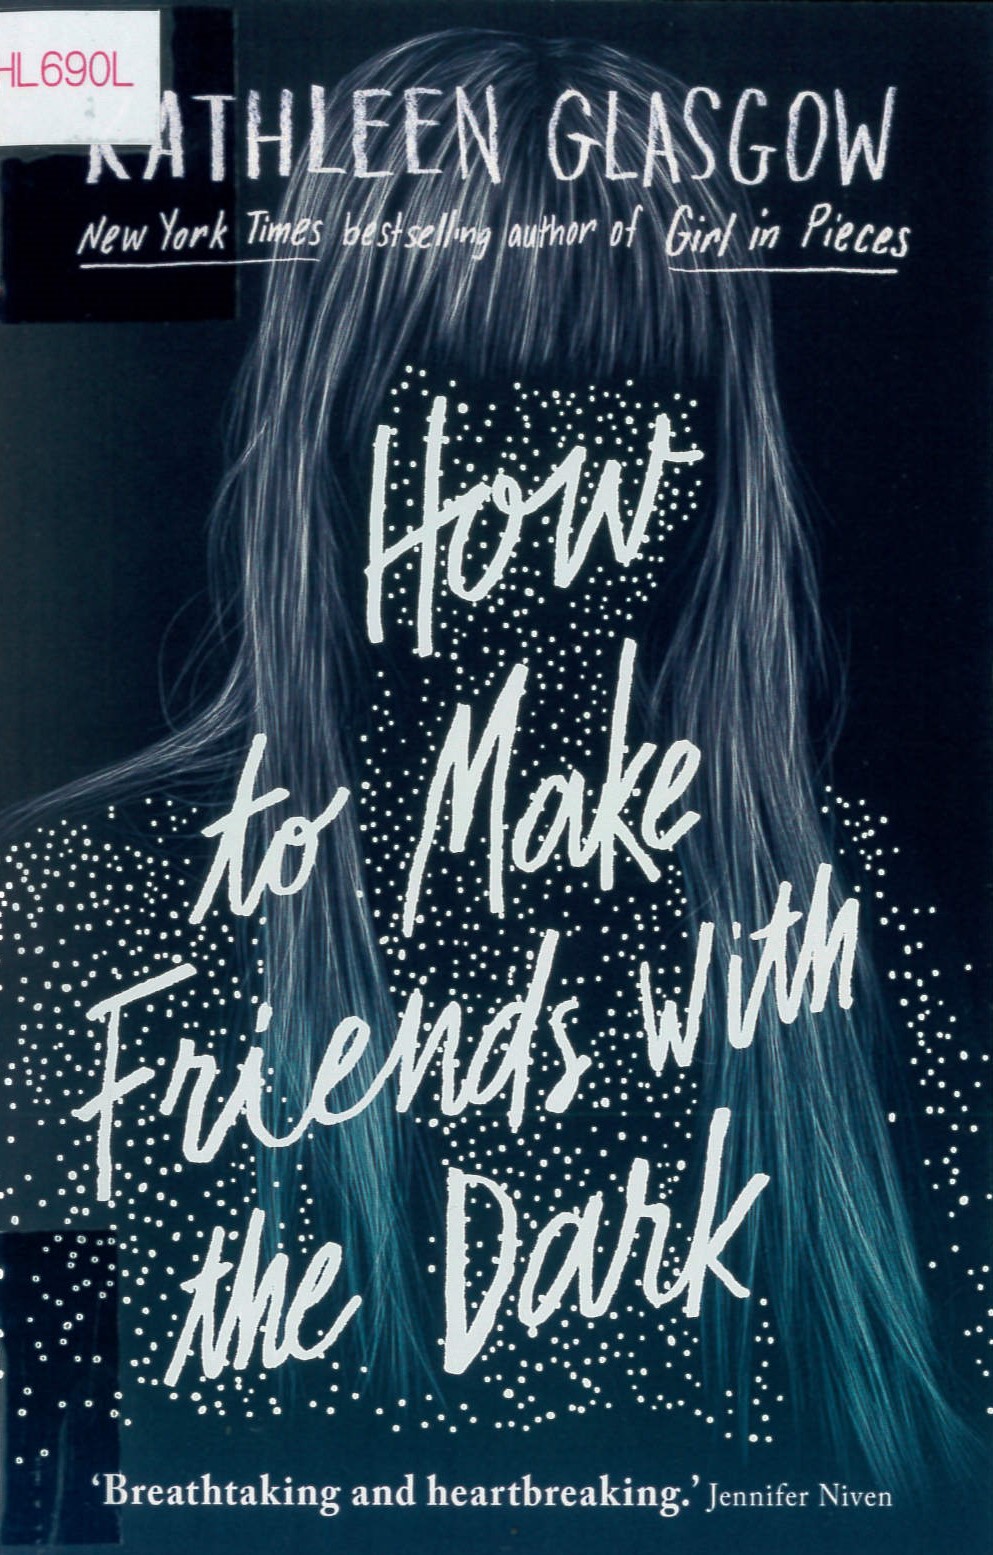 How to make friends with the dark /